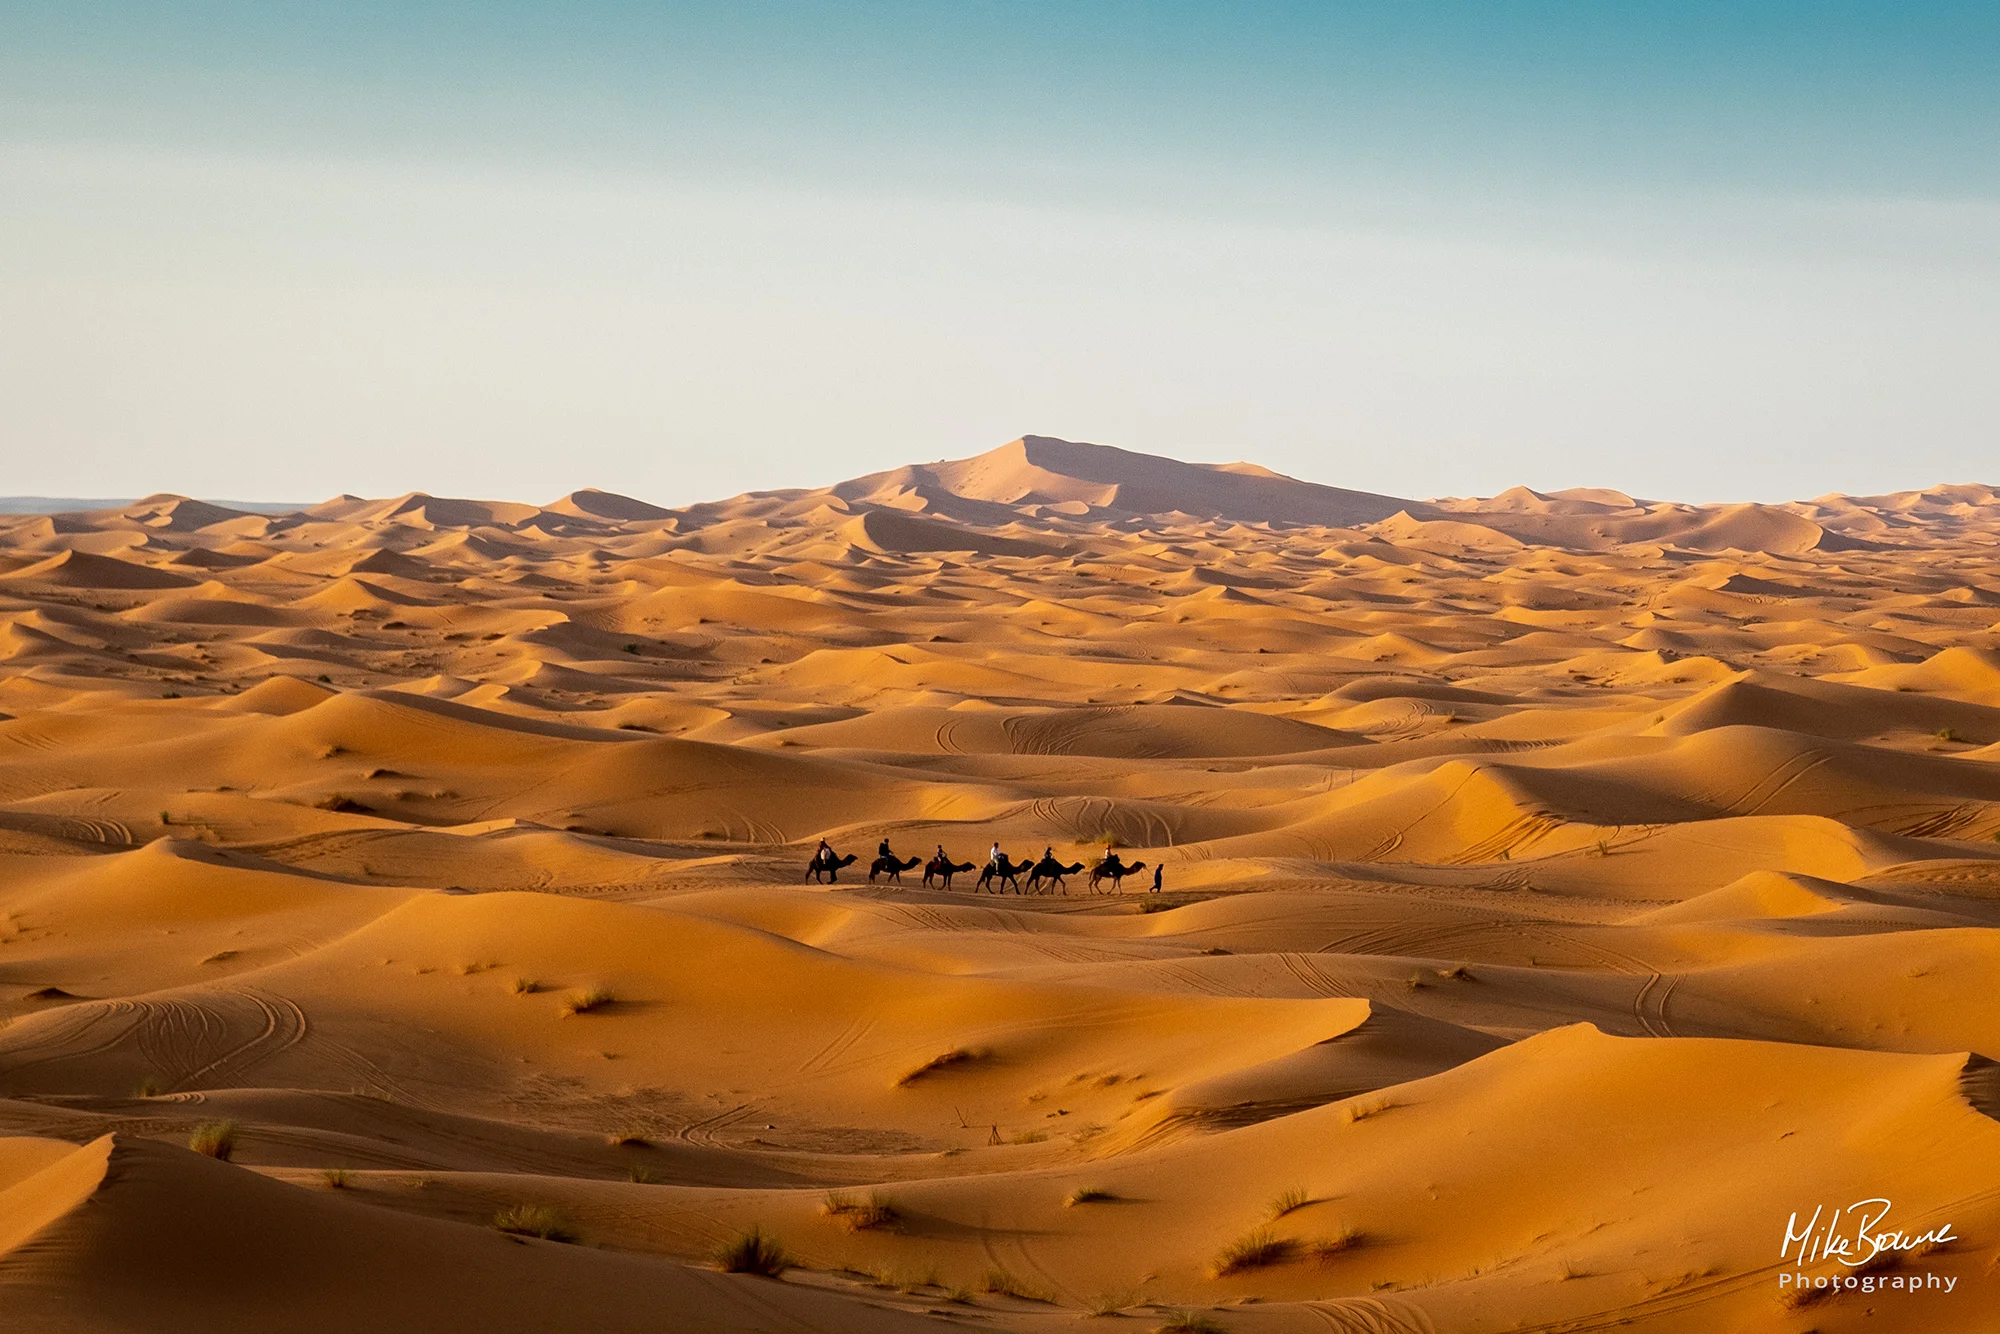 Distant camels and riders in the sand dunes at Merzouga, Morocco